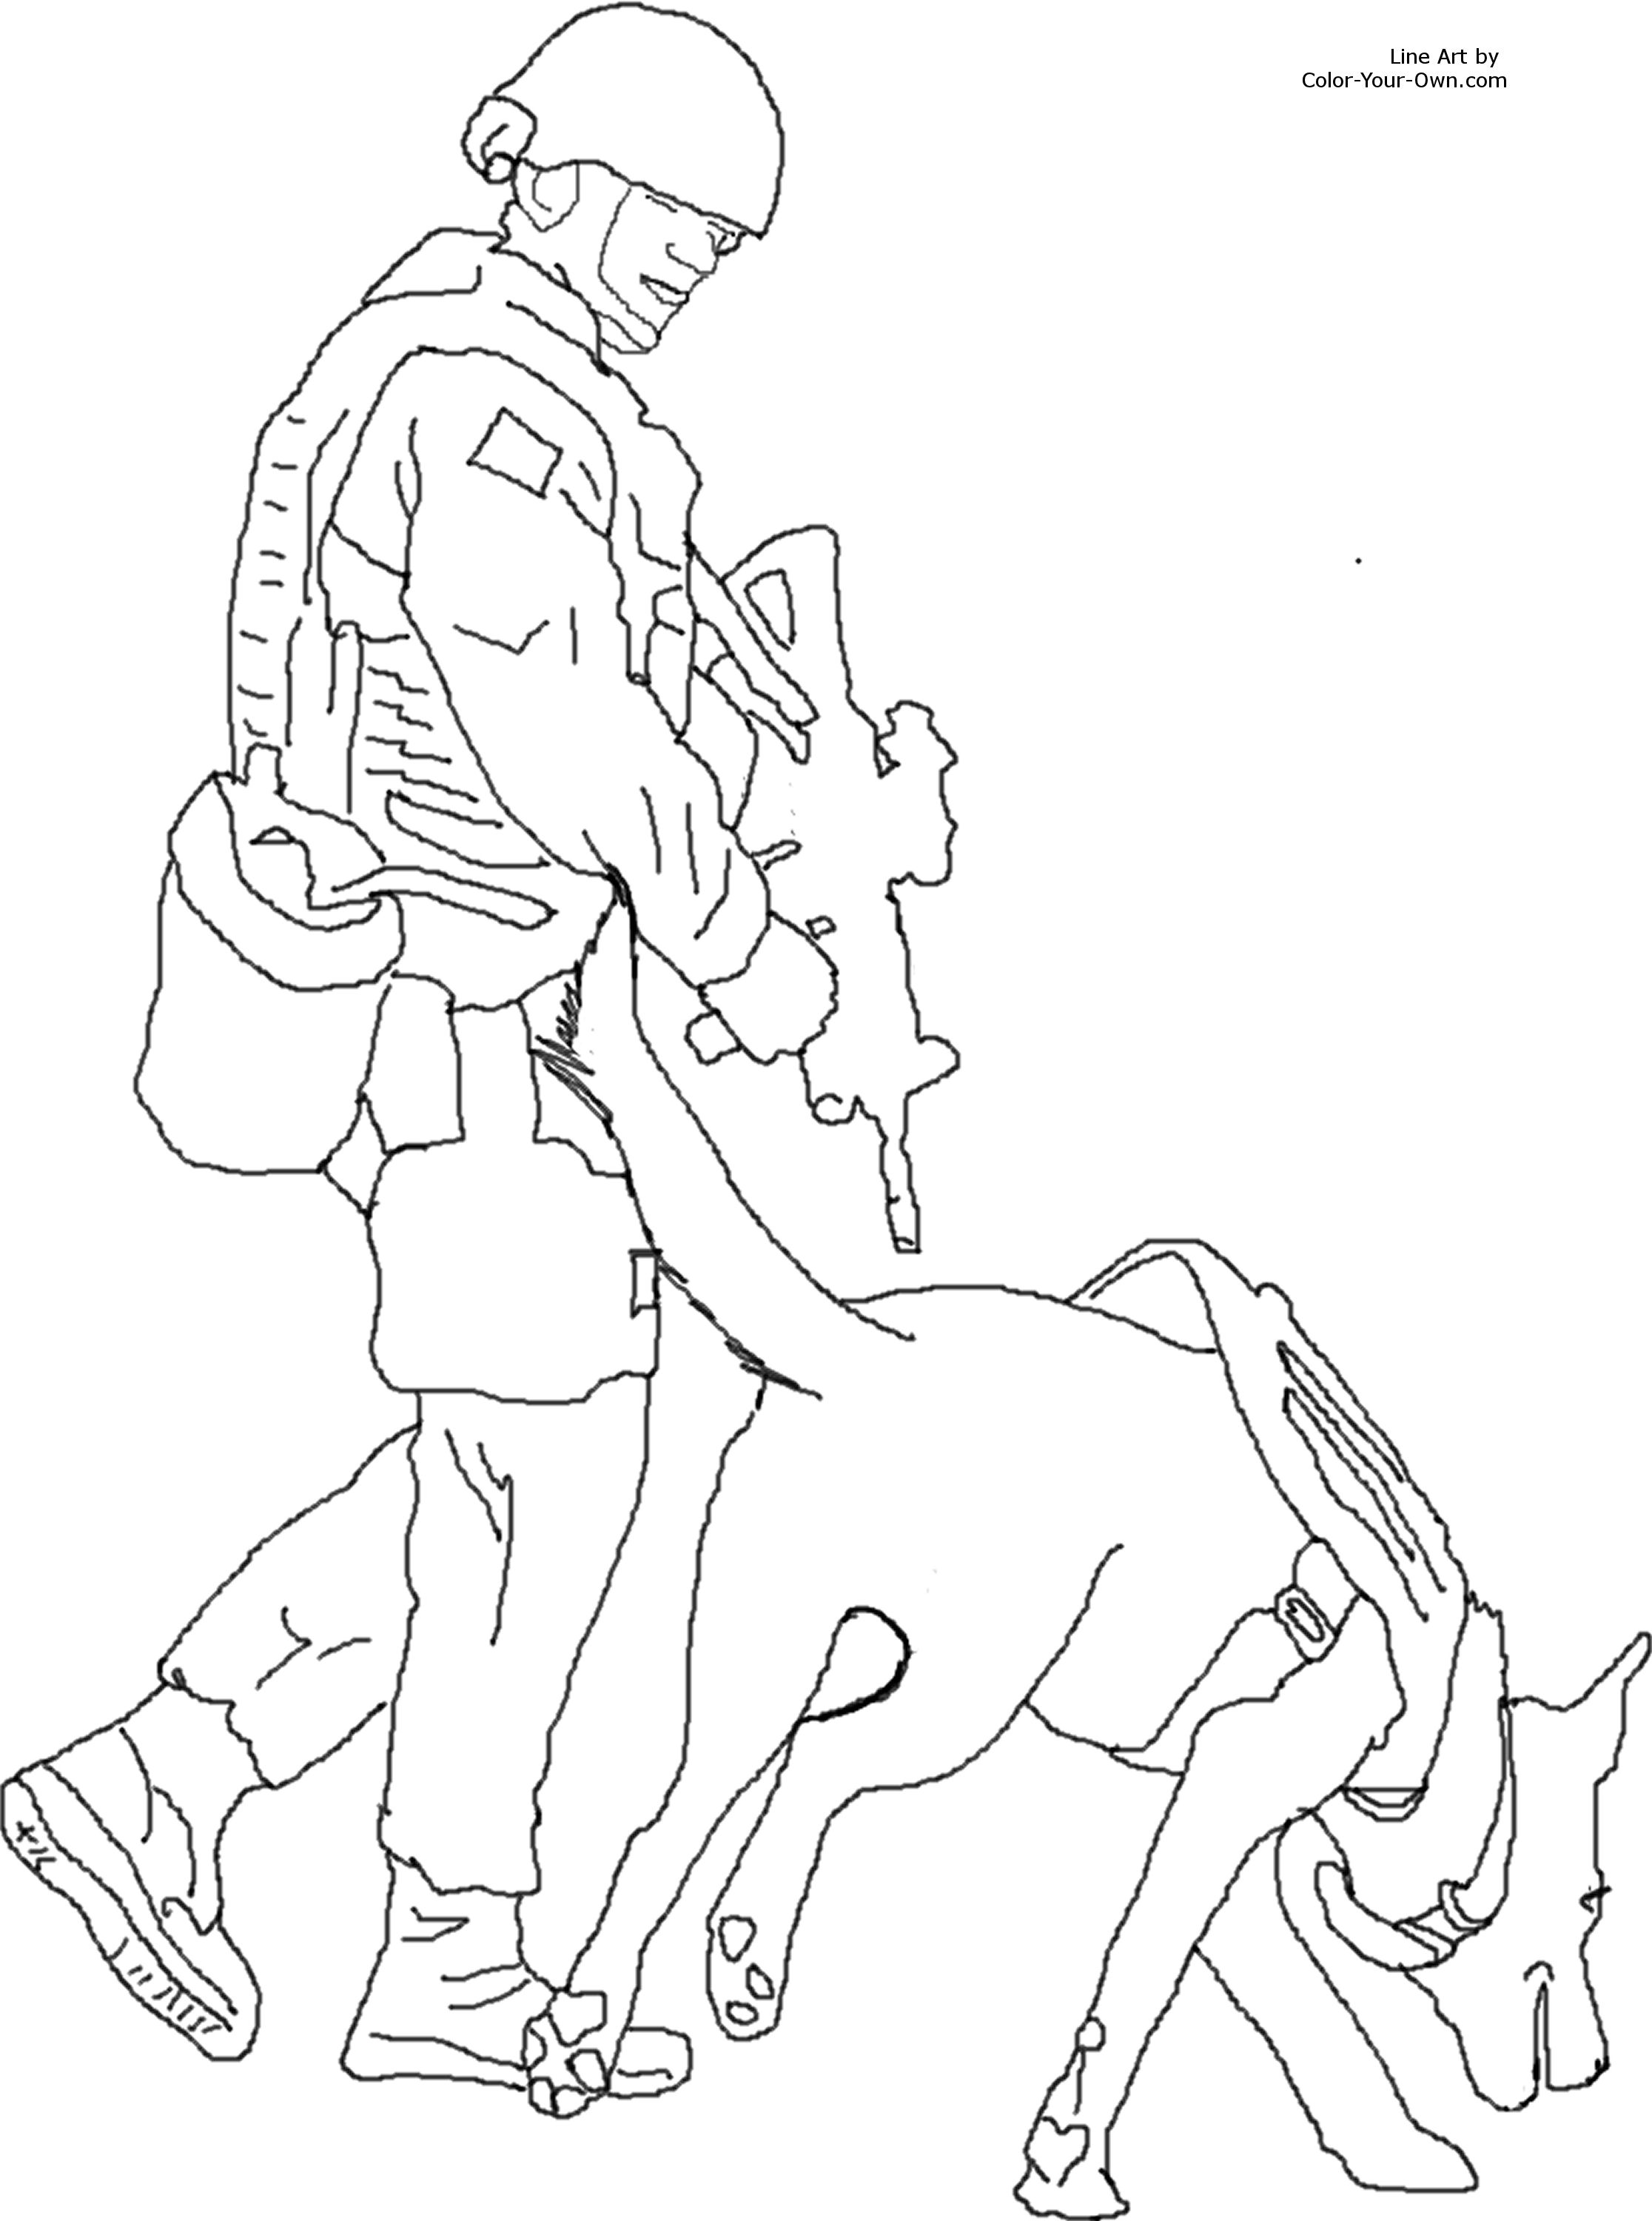 Bomb Detection Service Dog Coloring Page